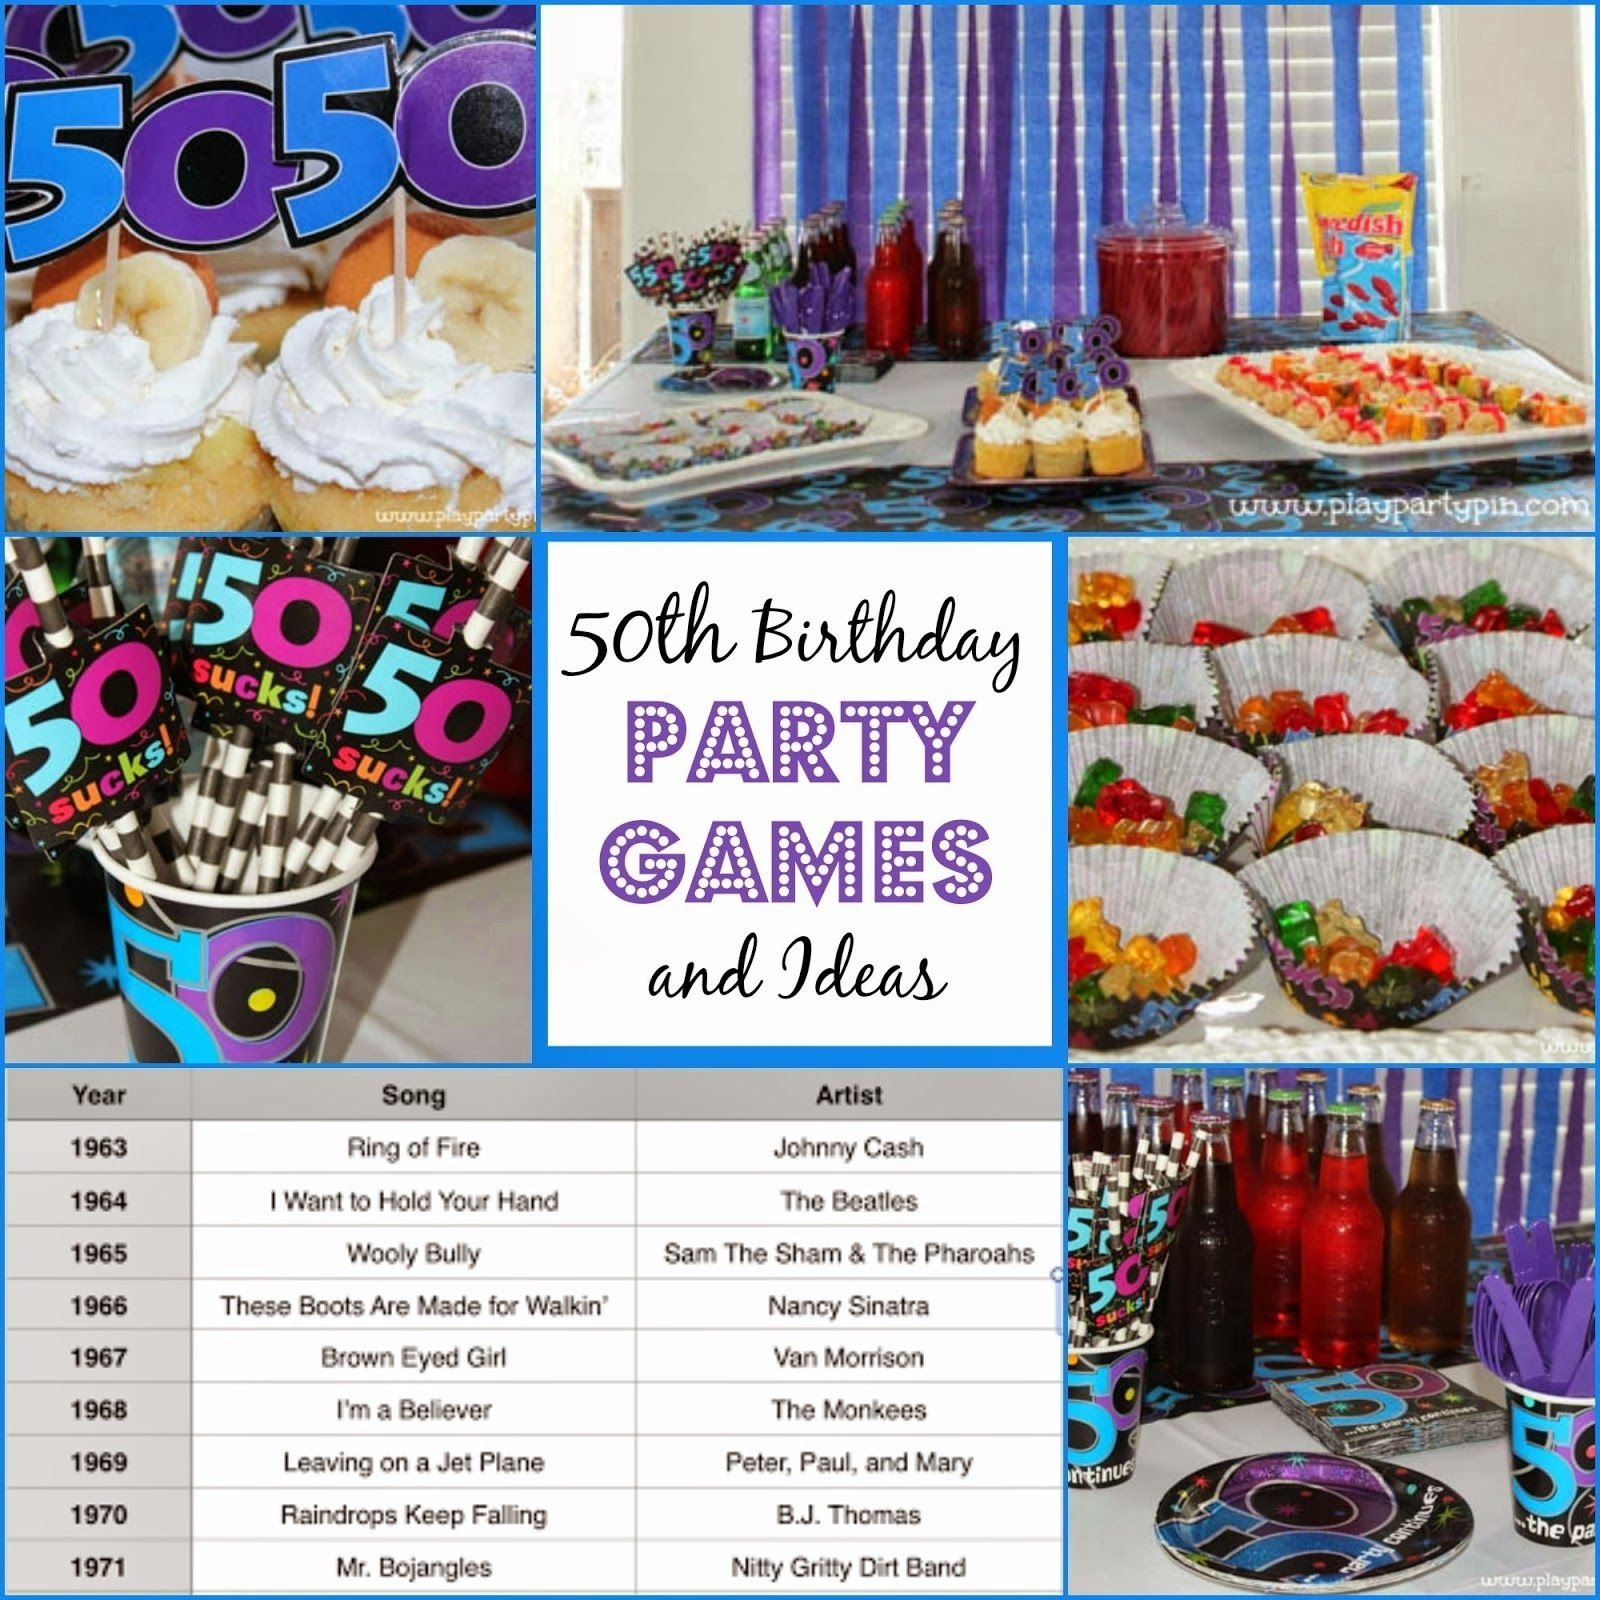 10 Stunning Ideas For 50Th Birthday Party 50th birthday party ideas for dad google search fun and crafty 2 2022